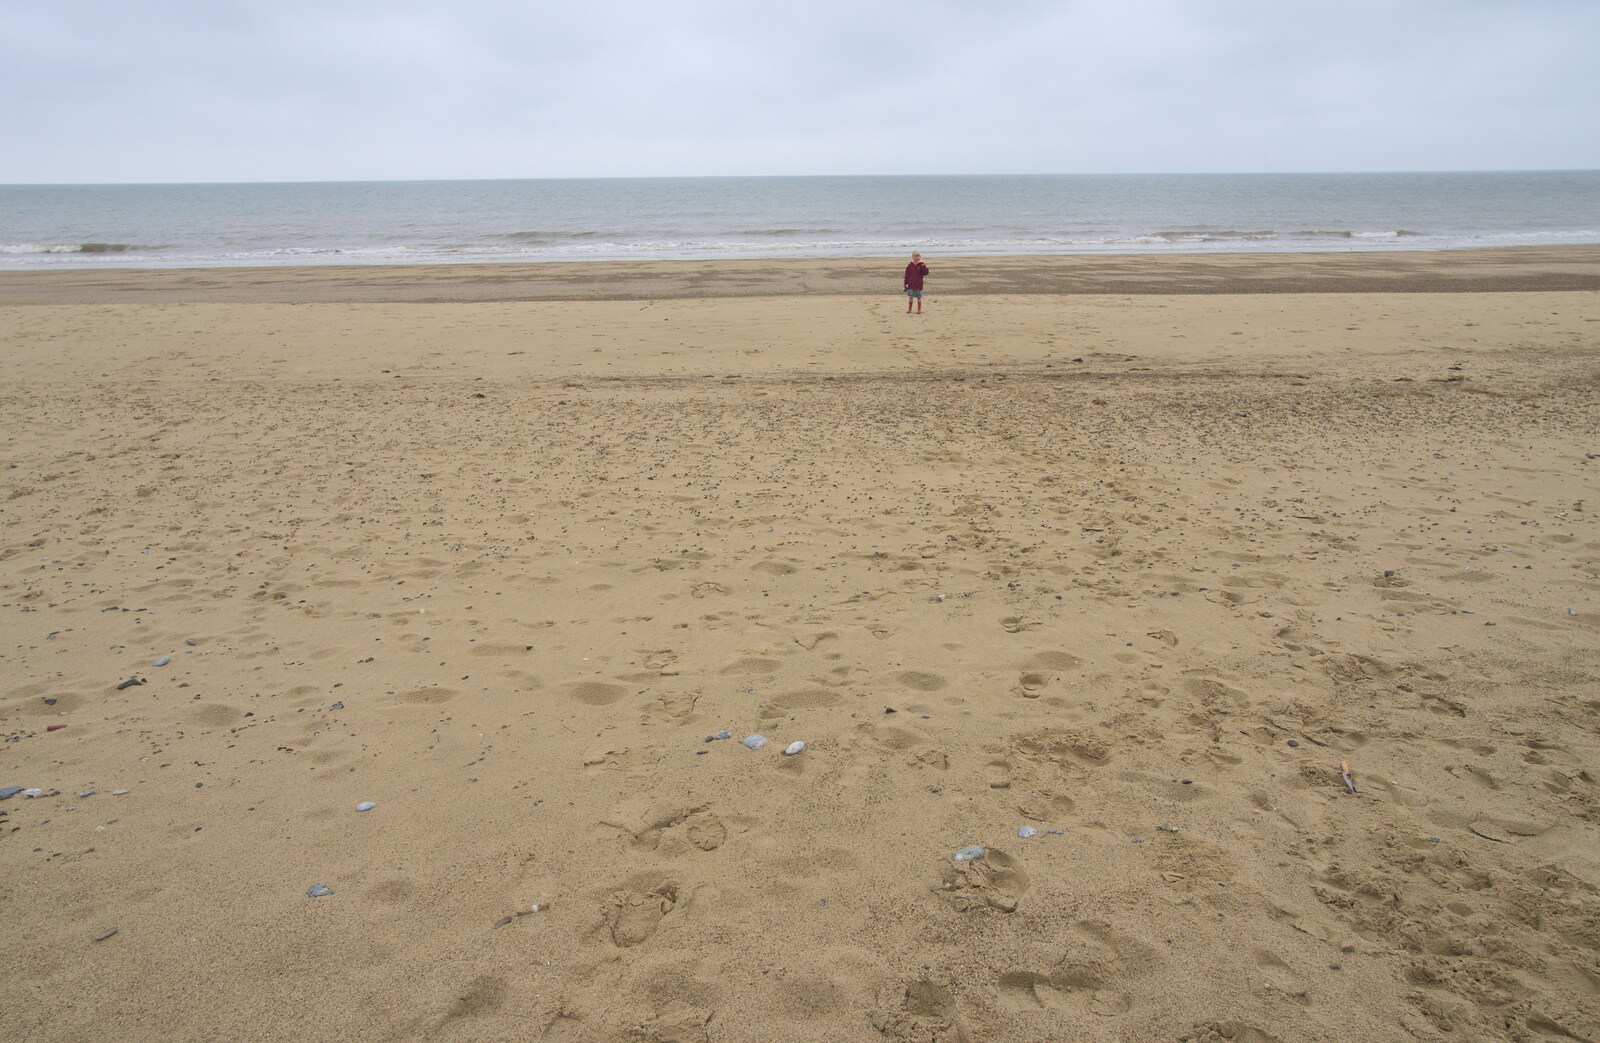 Grace is a dot on the beach from A Wet Weekend of Camping, Waxham Sands, Norfolk - 13th June 2015